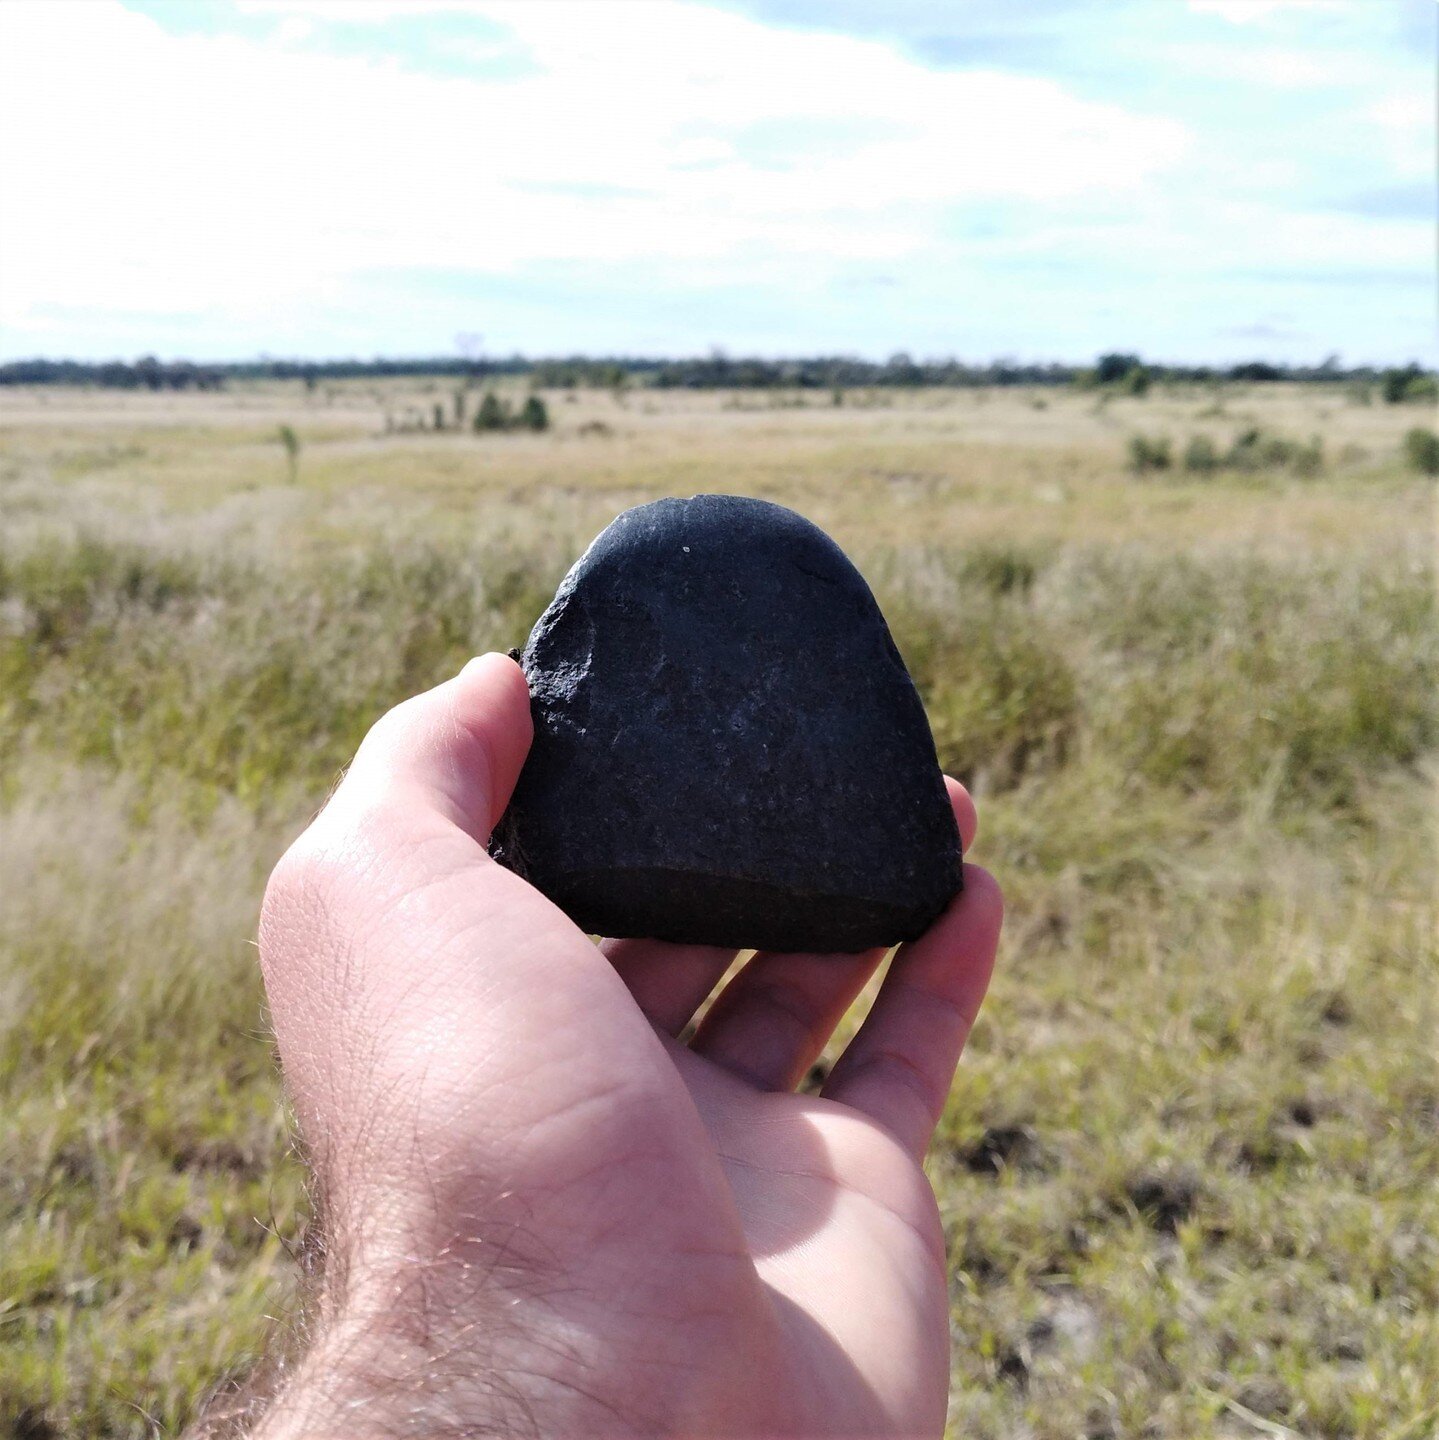 Coming at this #TechTuesday from a different perspective! Groundstone technology has been utilised by Aboriginal communities for thousands of years, with the oldest known grinding stone in Australia dating back to 30,000 years ago.

Originally used f